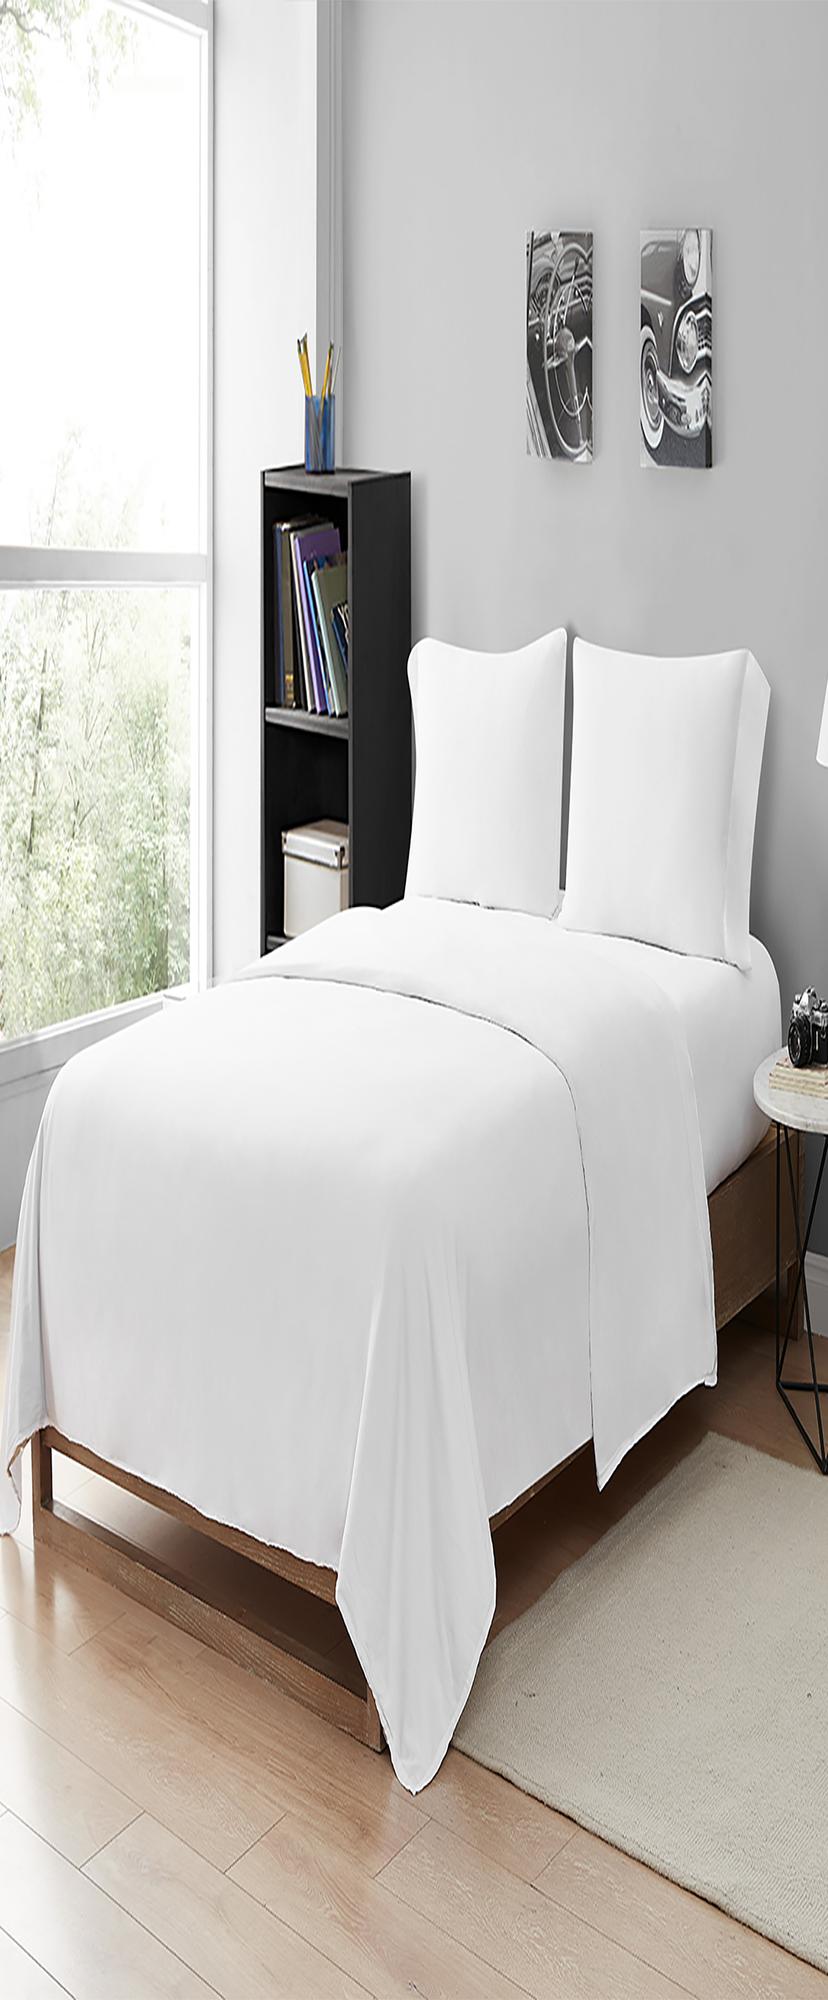 300TC Saudade Portugal Queen Sheet Set - Washed Sateen